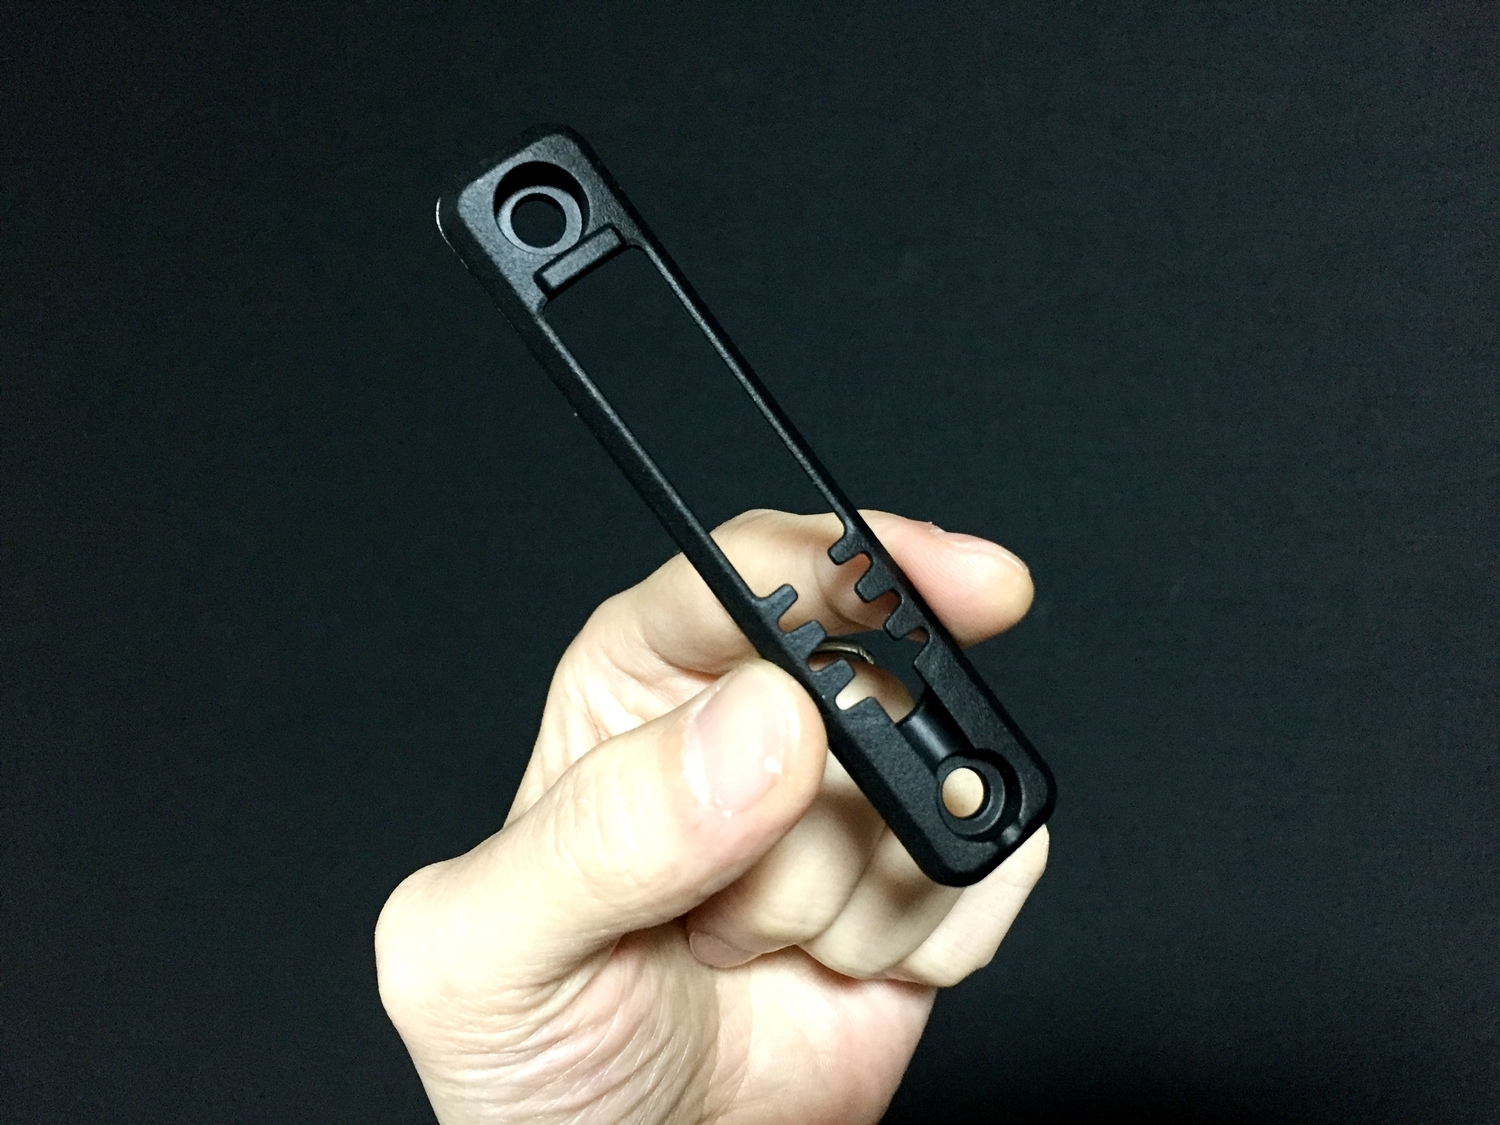 4 M-LOK MAGPUL Tape Switch Mounting Plate for Surefire ST Polymer MADE IN USA マグプル 実物 本家 テープ リモート スイッチ